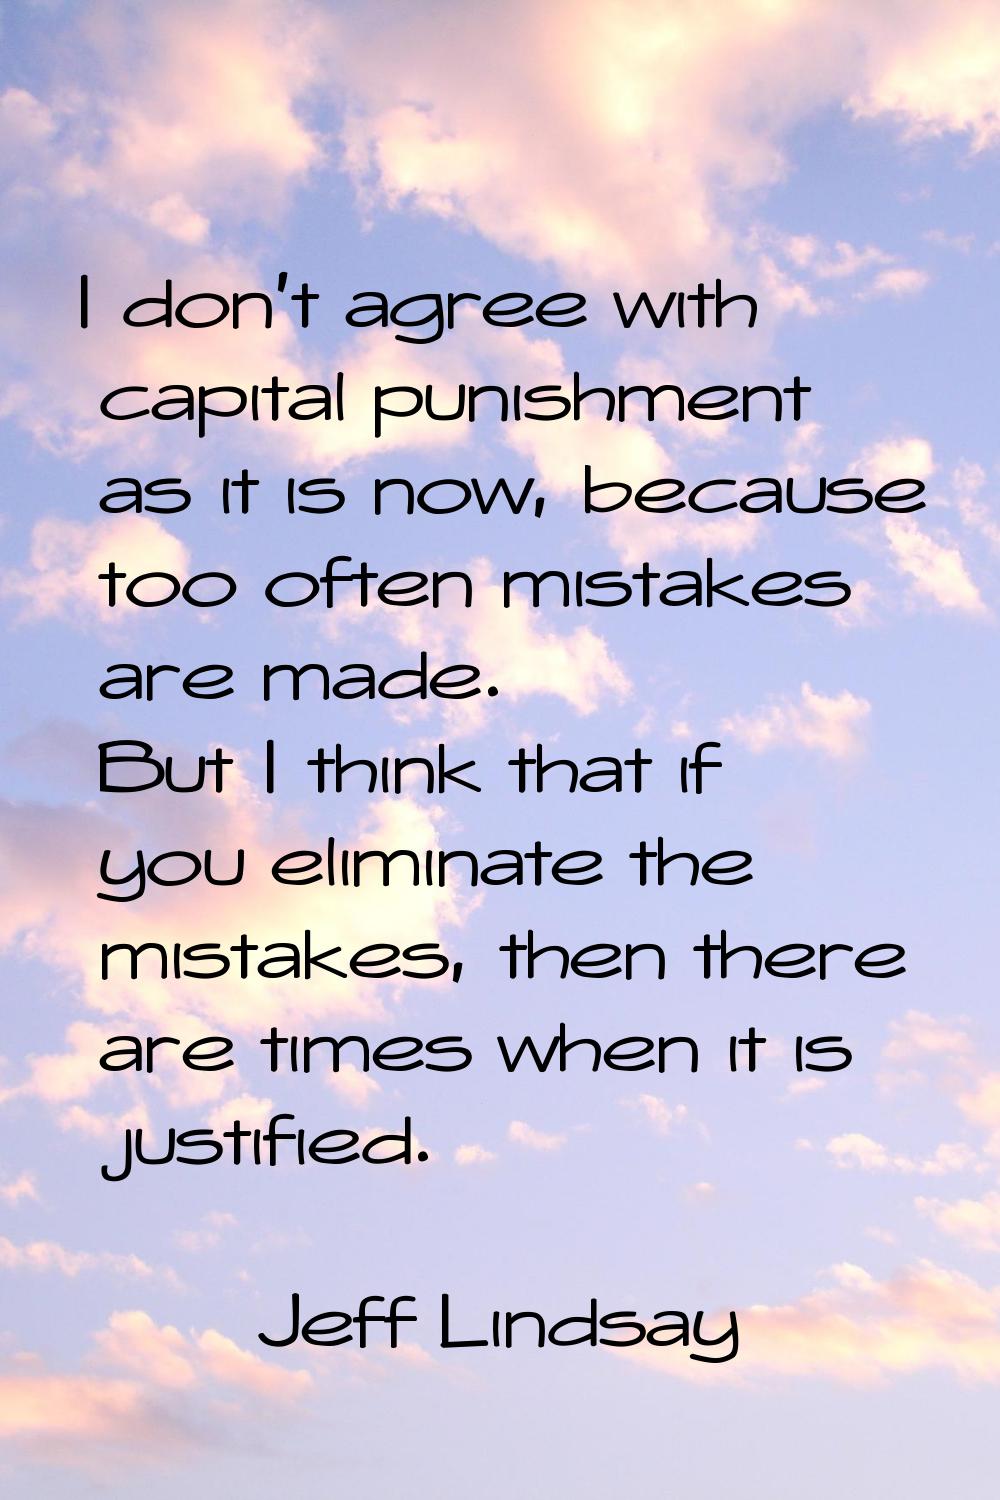 I don't agree with capital punishment as it is now, because too often mistakes are made. But I thin